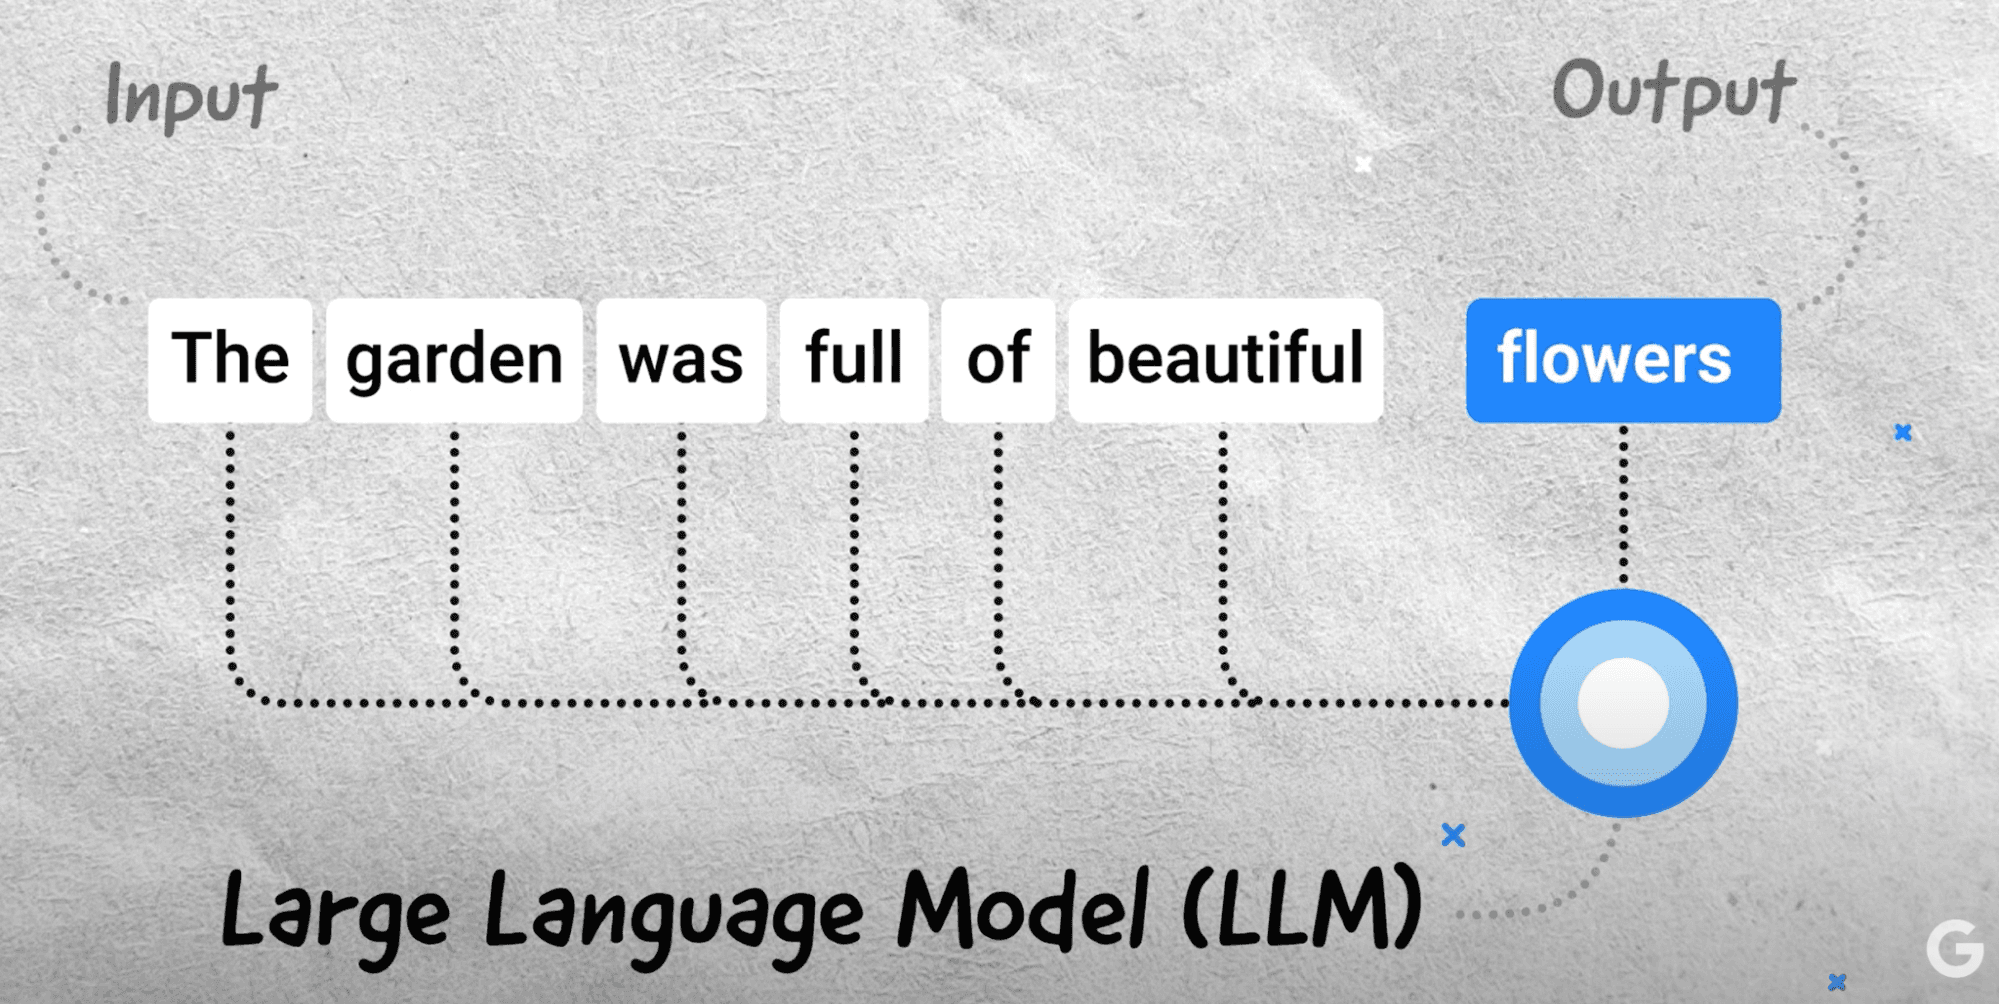 An image showing how Large Language Models work.